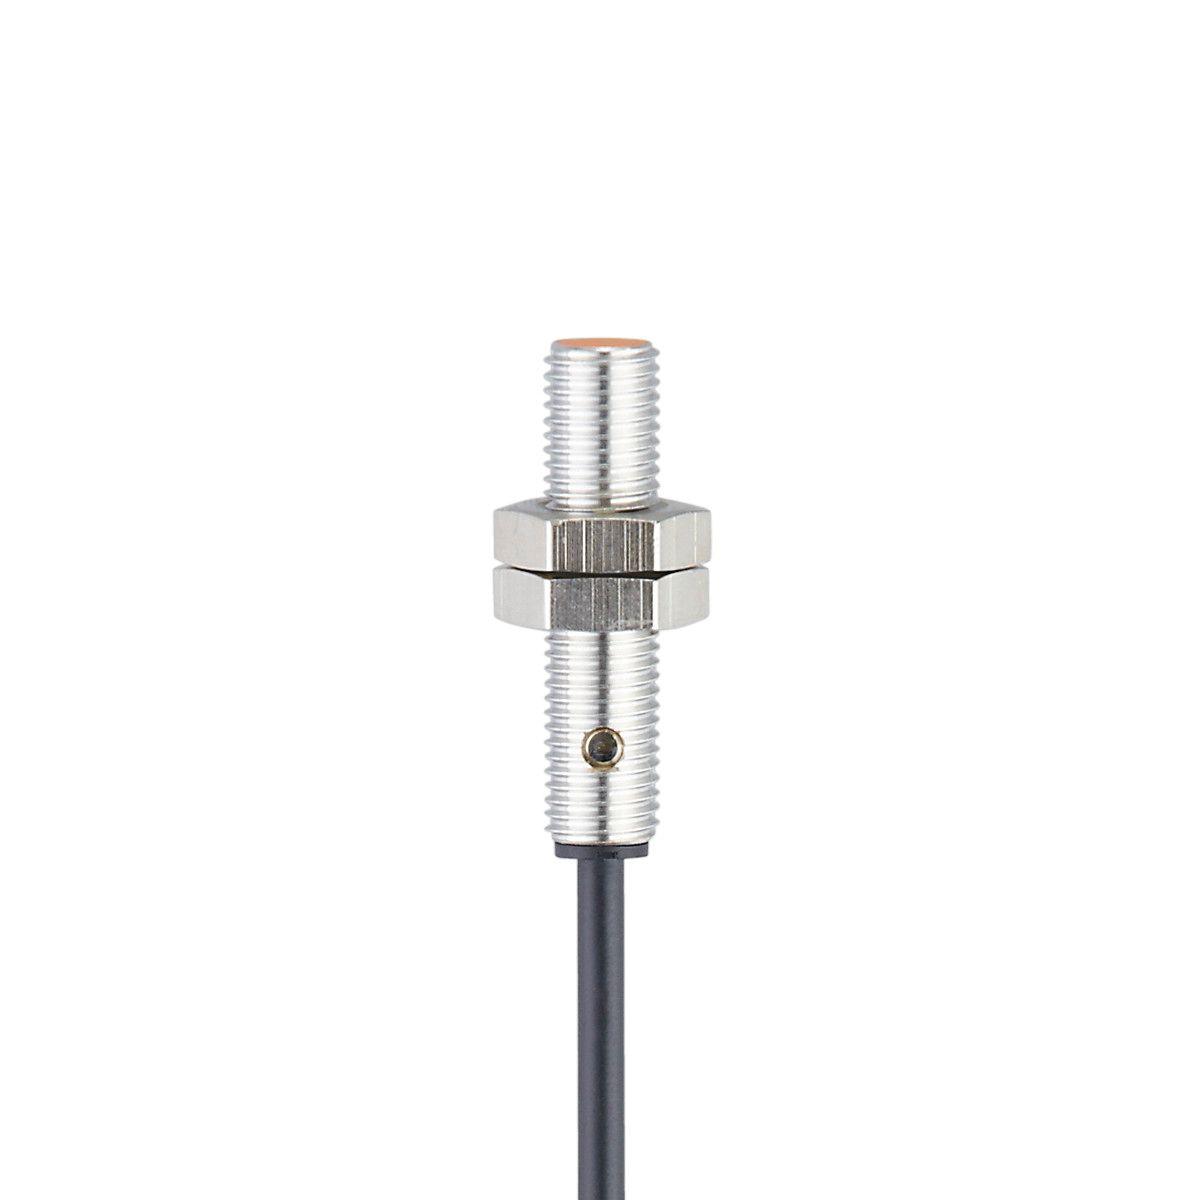 ifm Electronic IE5072 Inductive sensor, Electrical design: PNP, Output function: normally open, Sensing range [mm]: 1, Housing: Threaded type, Dimensions [mm]: M8 x 1 / L = 35